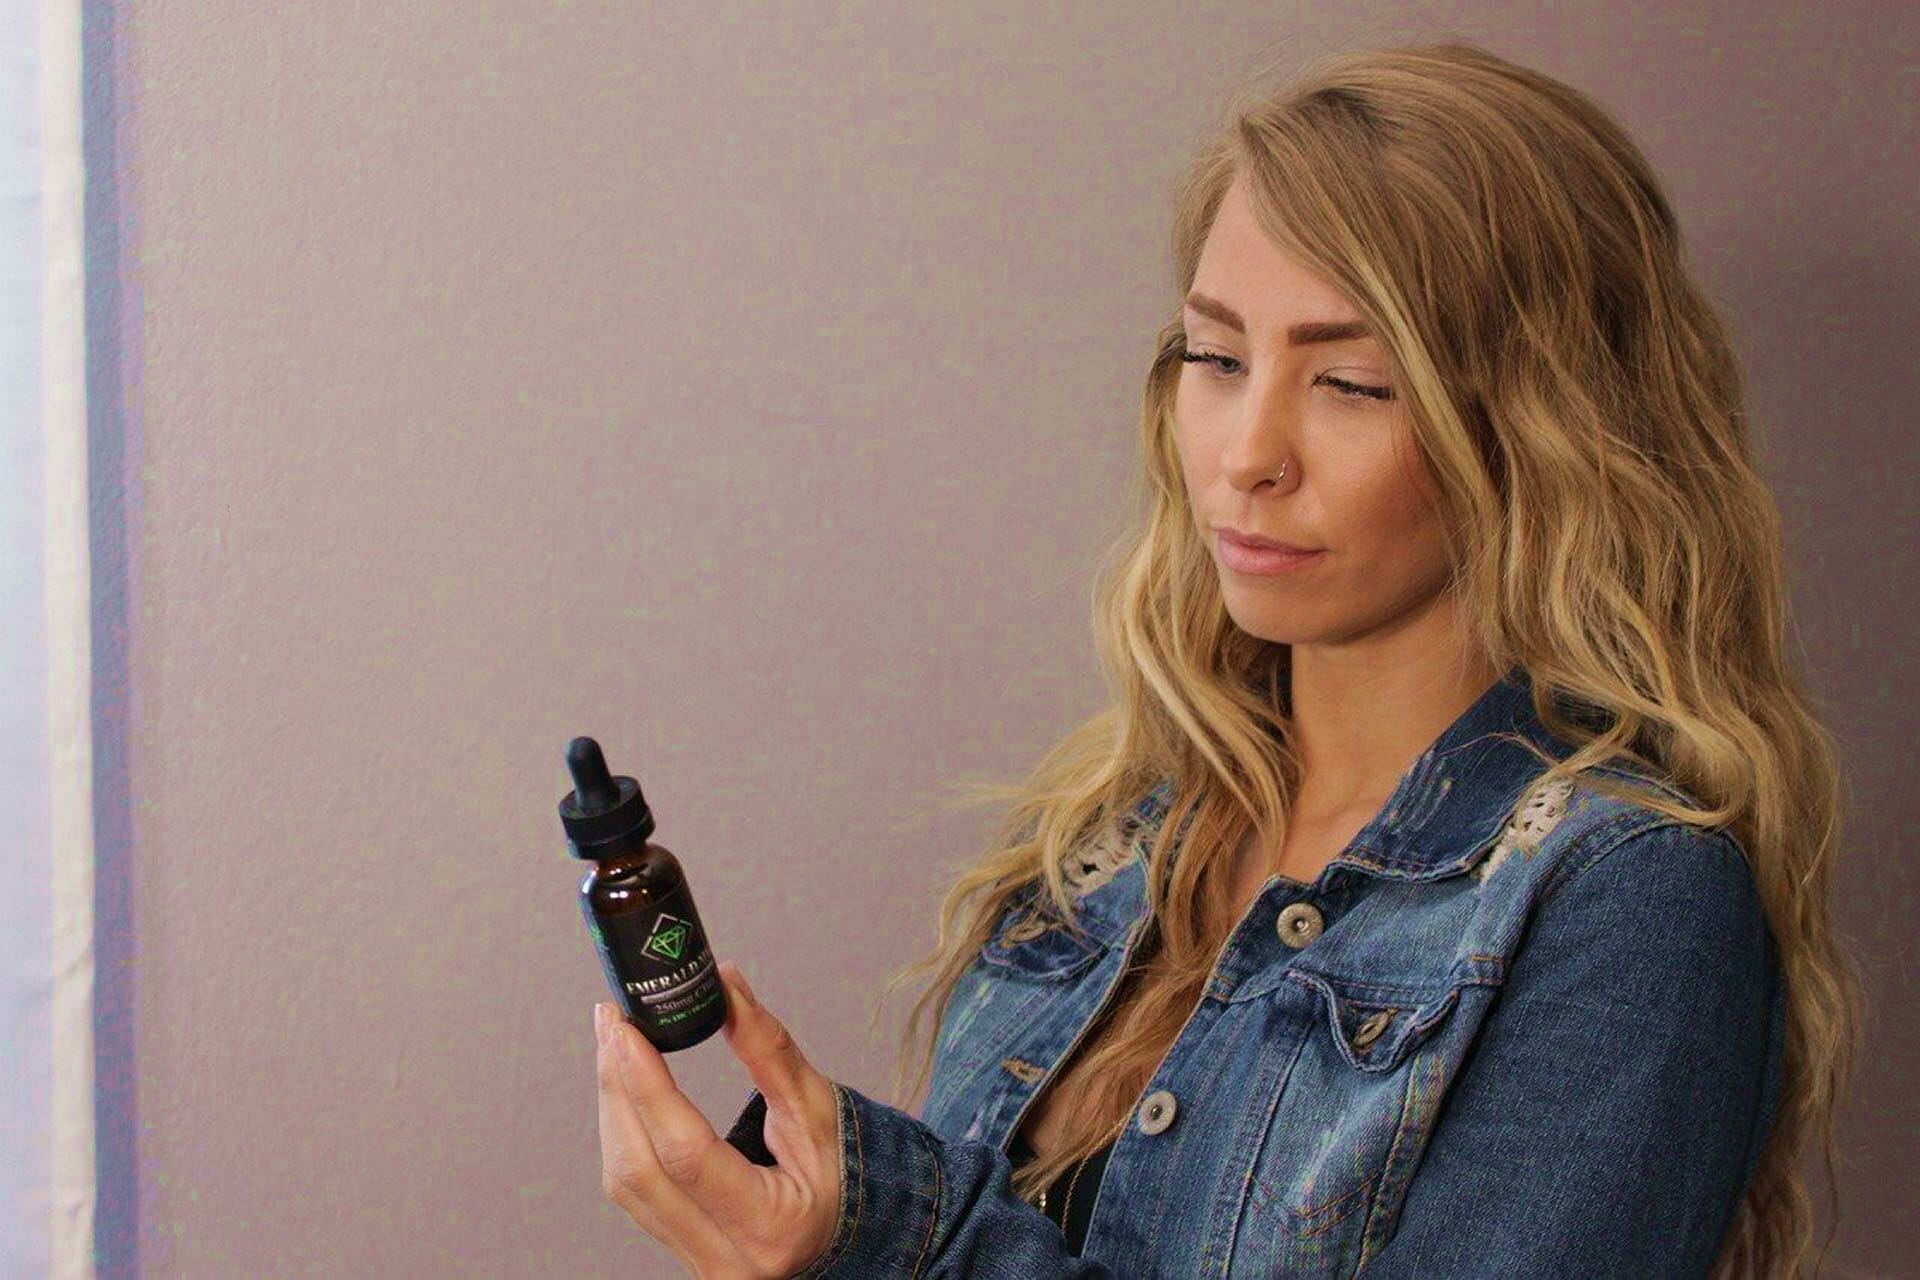 It's not hard to understand the key advantages and disadvantages of CBD oil